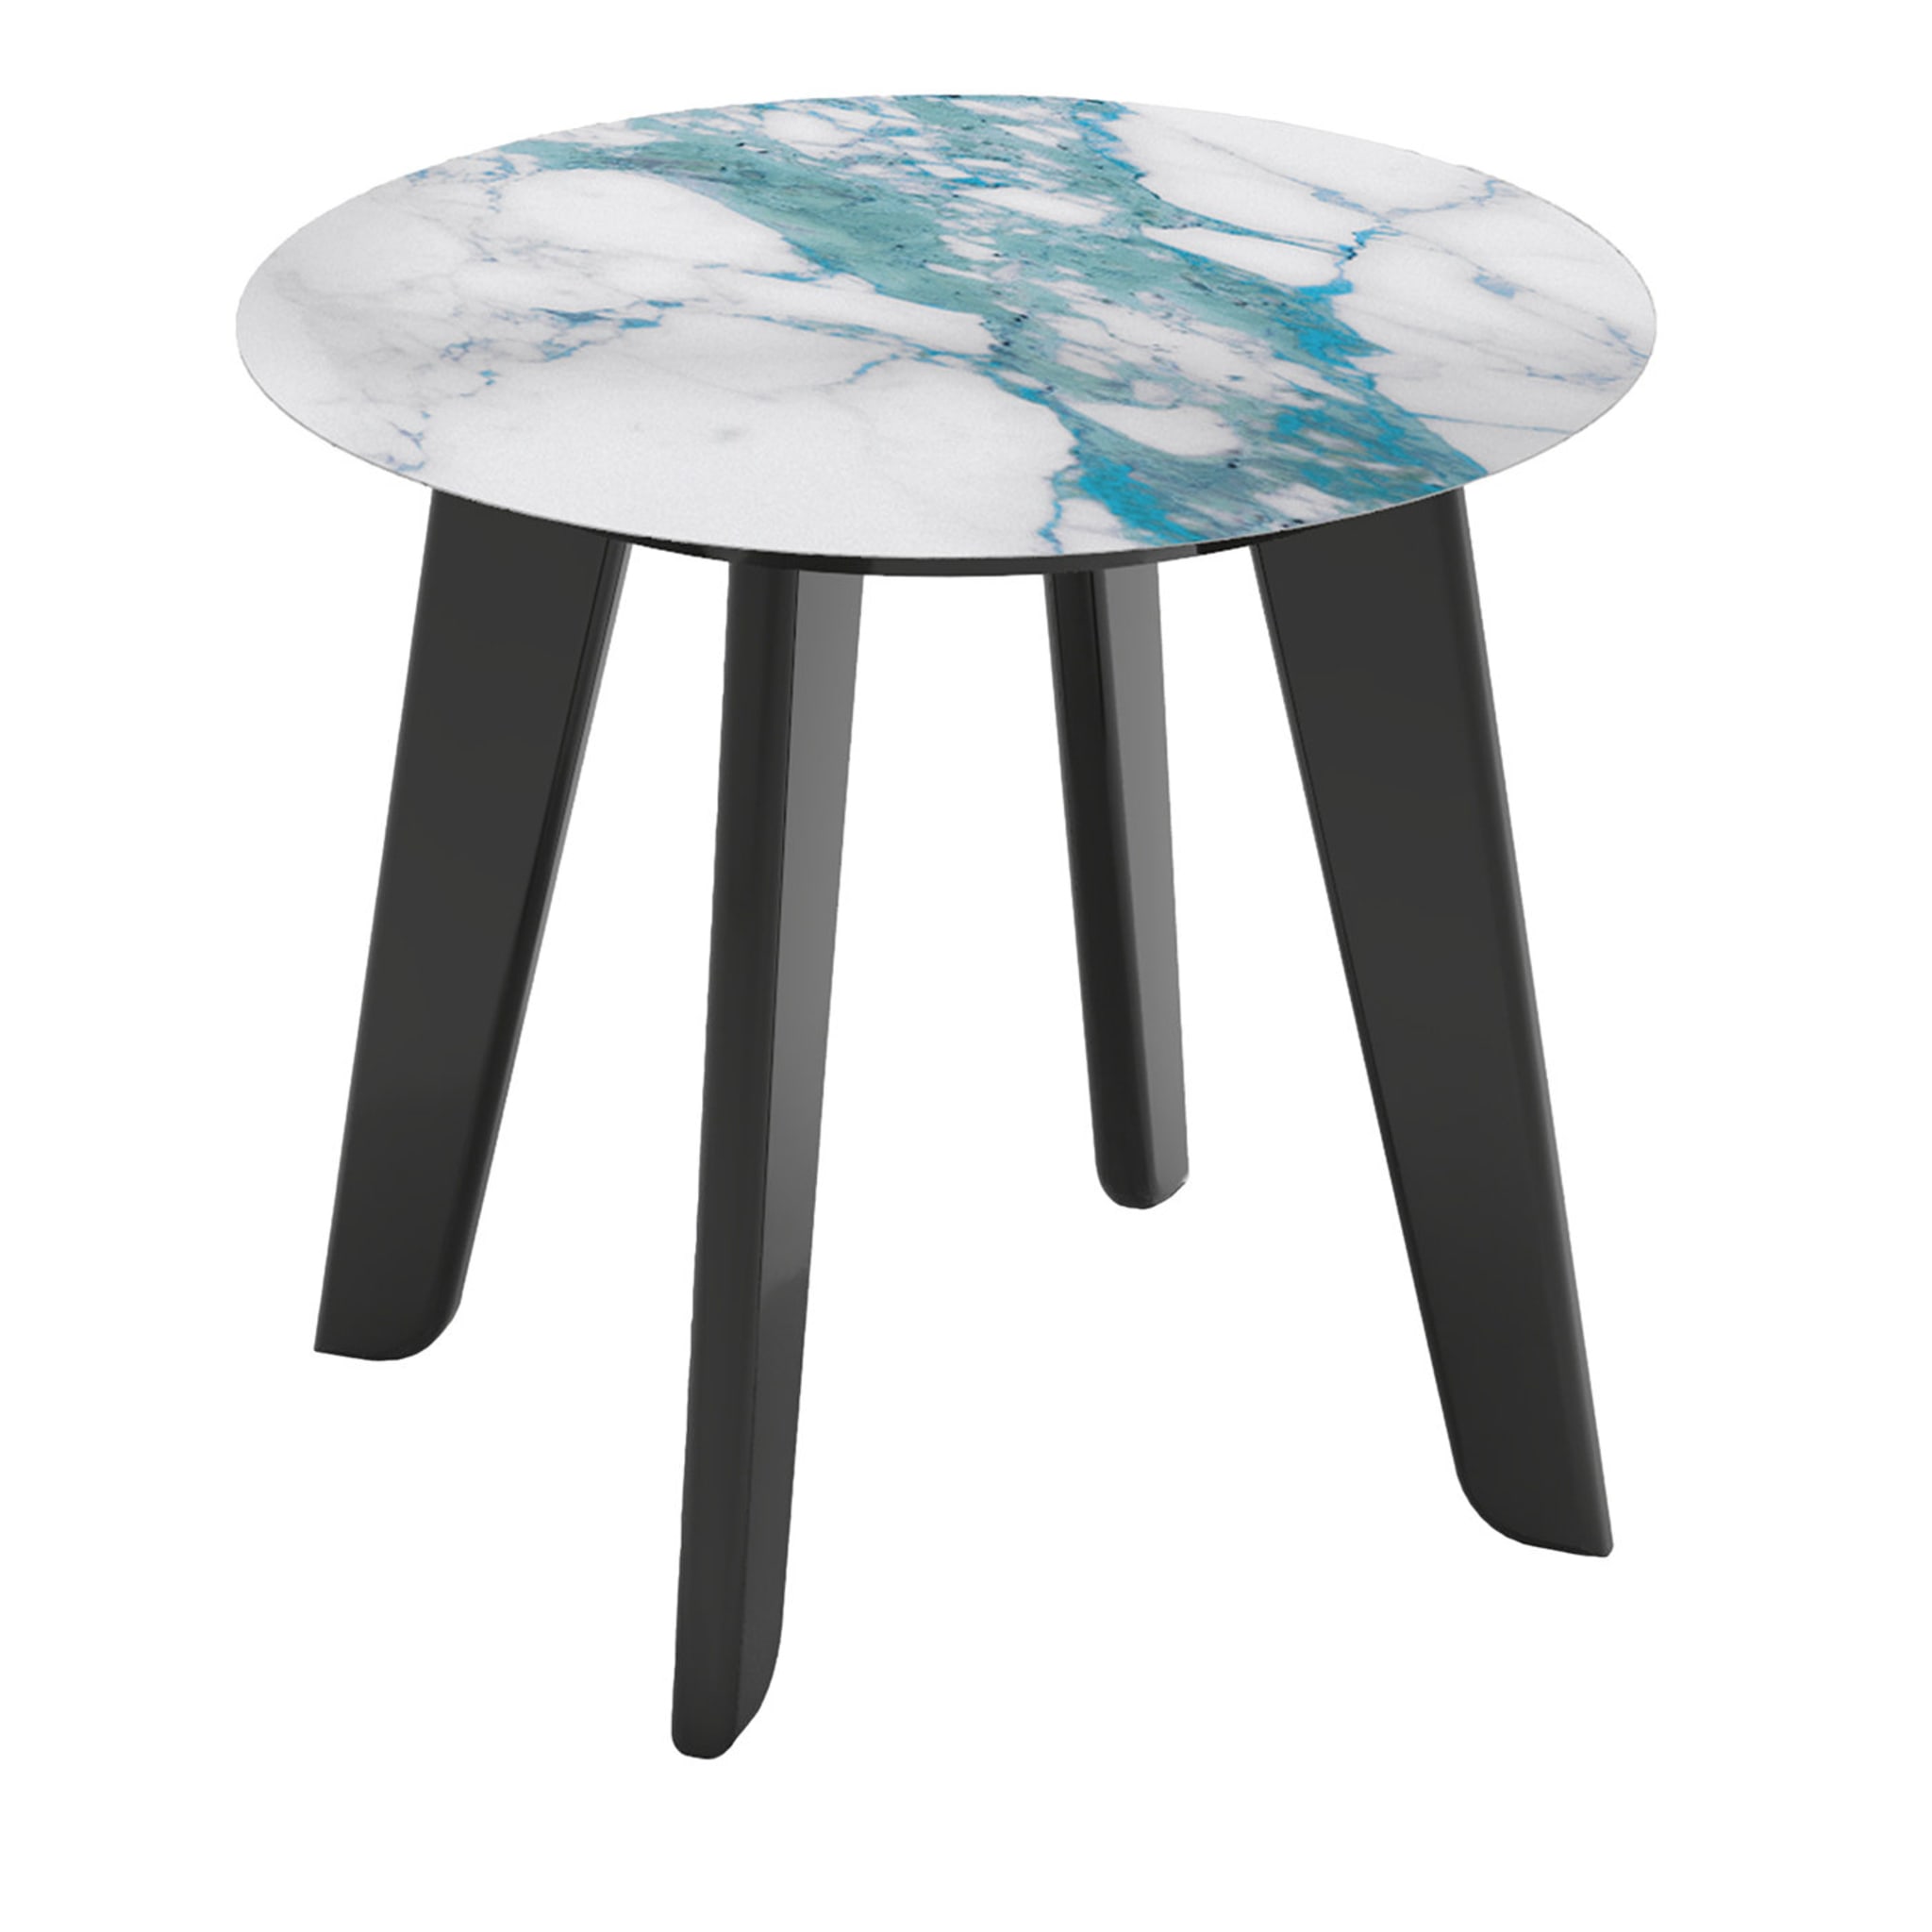 Owen Low Round Side Table with White and Turquoise Top (Table d'appoint ronde basse avec plateau blanc et turquoise) - Vue principale